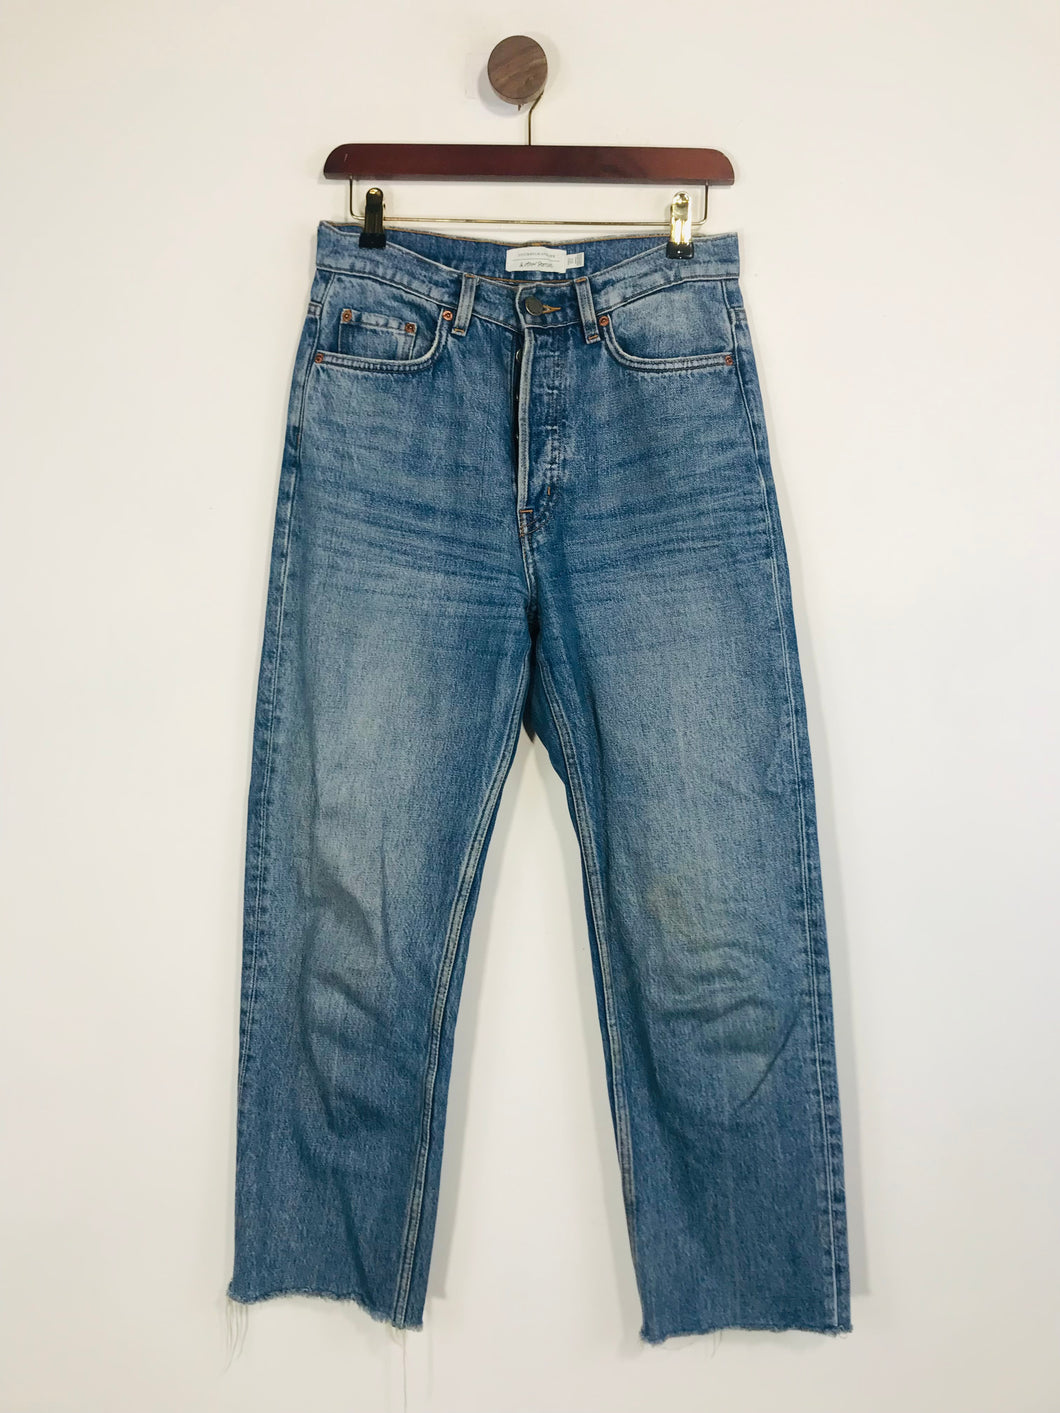 & Other Stories Women's Straight Jeans | W27 UK8-10 | Blue